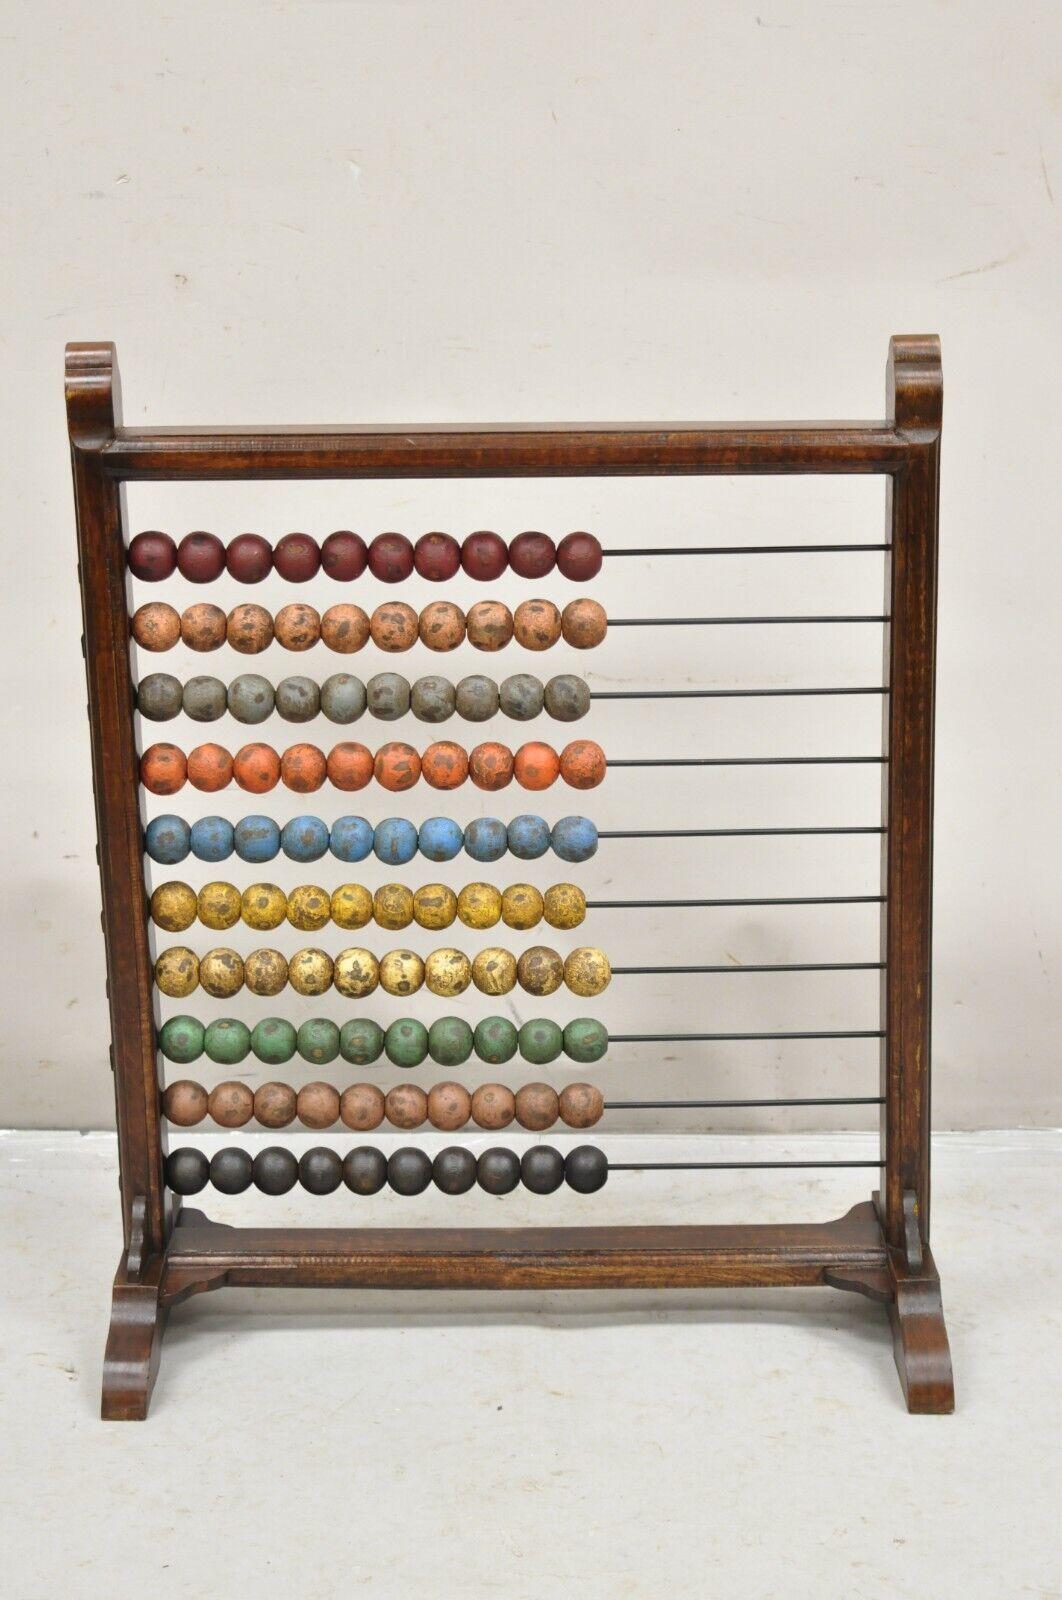 Large Vintage Mongolian Wooden Math Abacus with Painted Wooden Balls. Item features Painted wooden balls in red, pink, gray, orange, blue, yellow, green and brown. Circa Mid 20th Century, possibly older (age undetermined. Measurements: 28.5